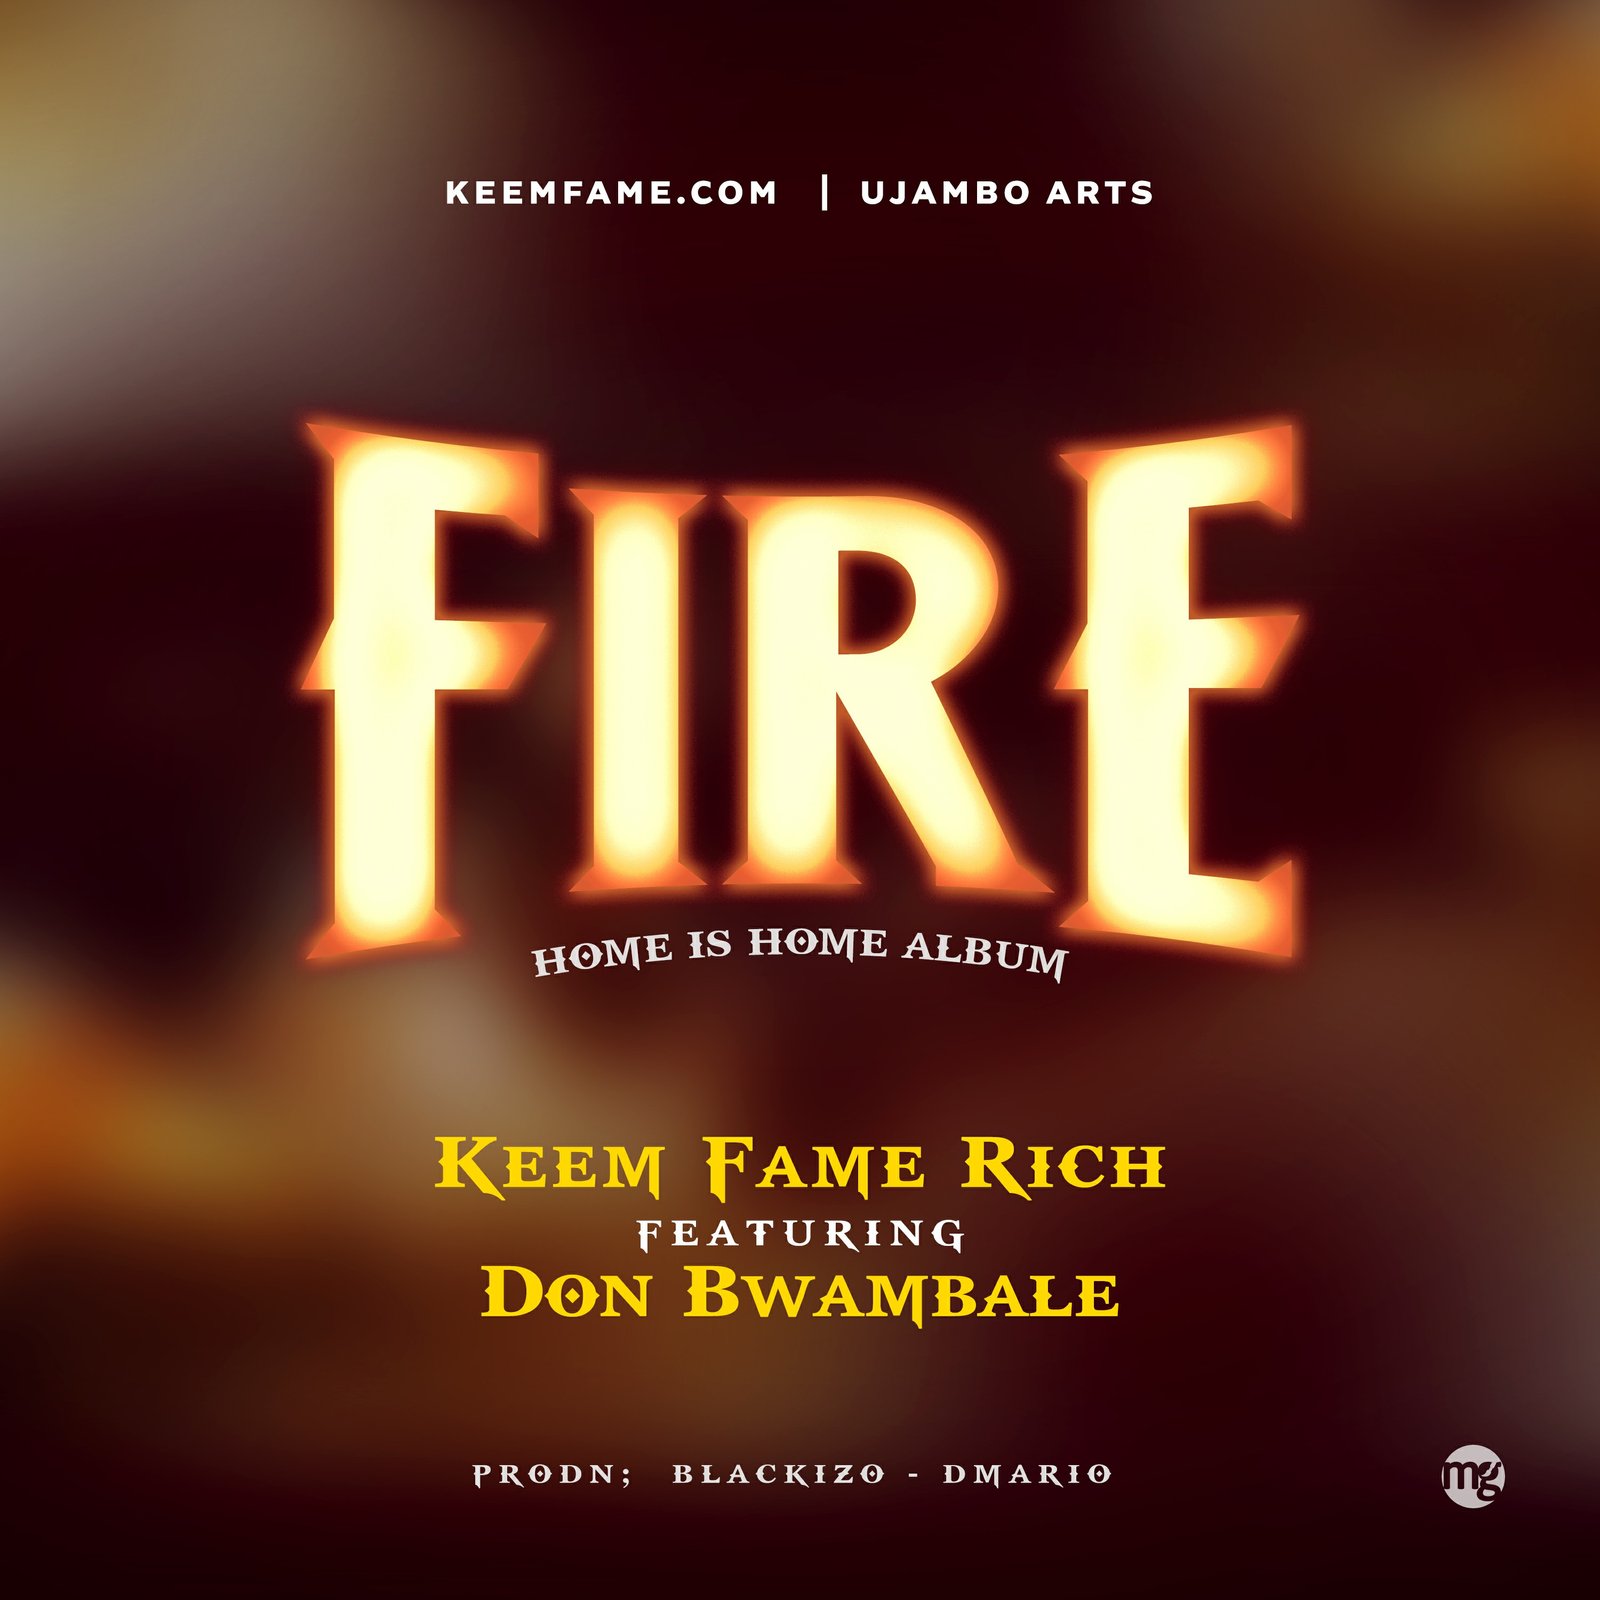 Keem Fame Rich Drops New Song Titled “FIRE” Featuring Don Bwambale